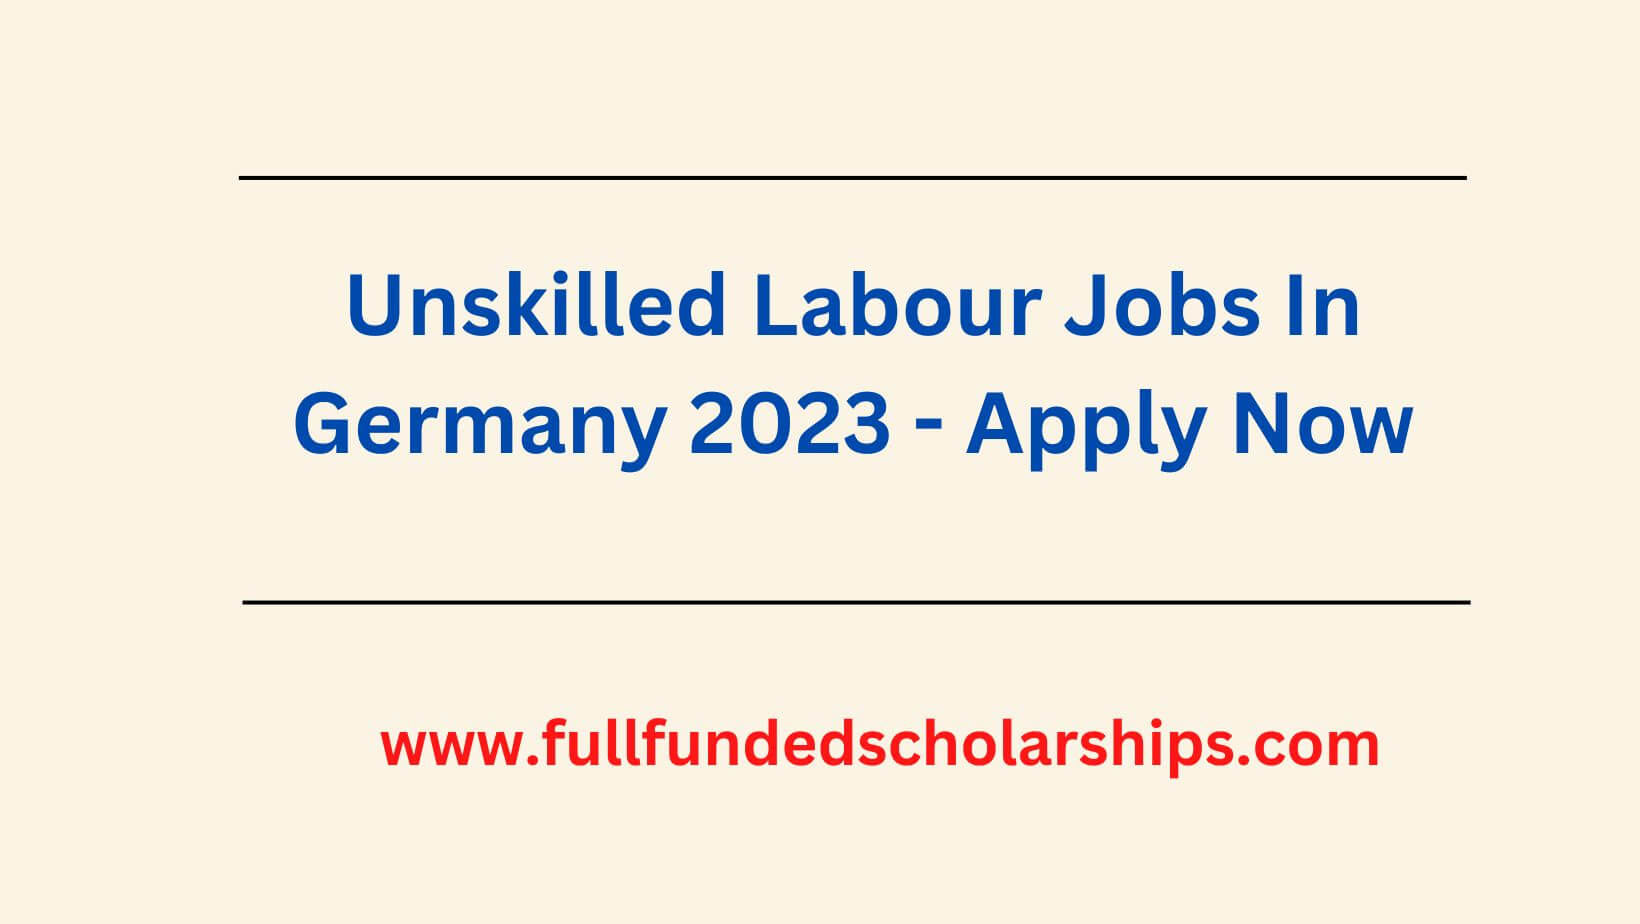 Unskilled Labour Jobs In Germany 2023 - Apply Now